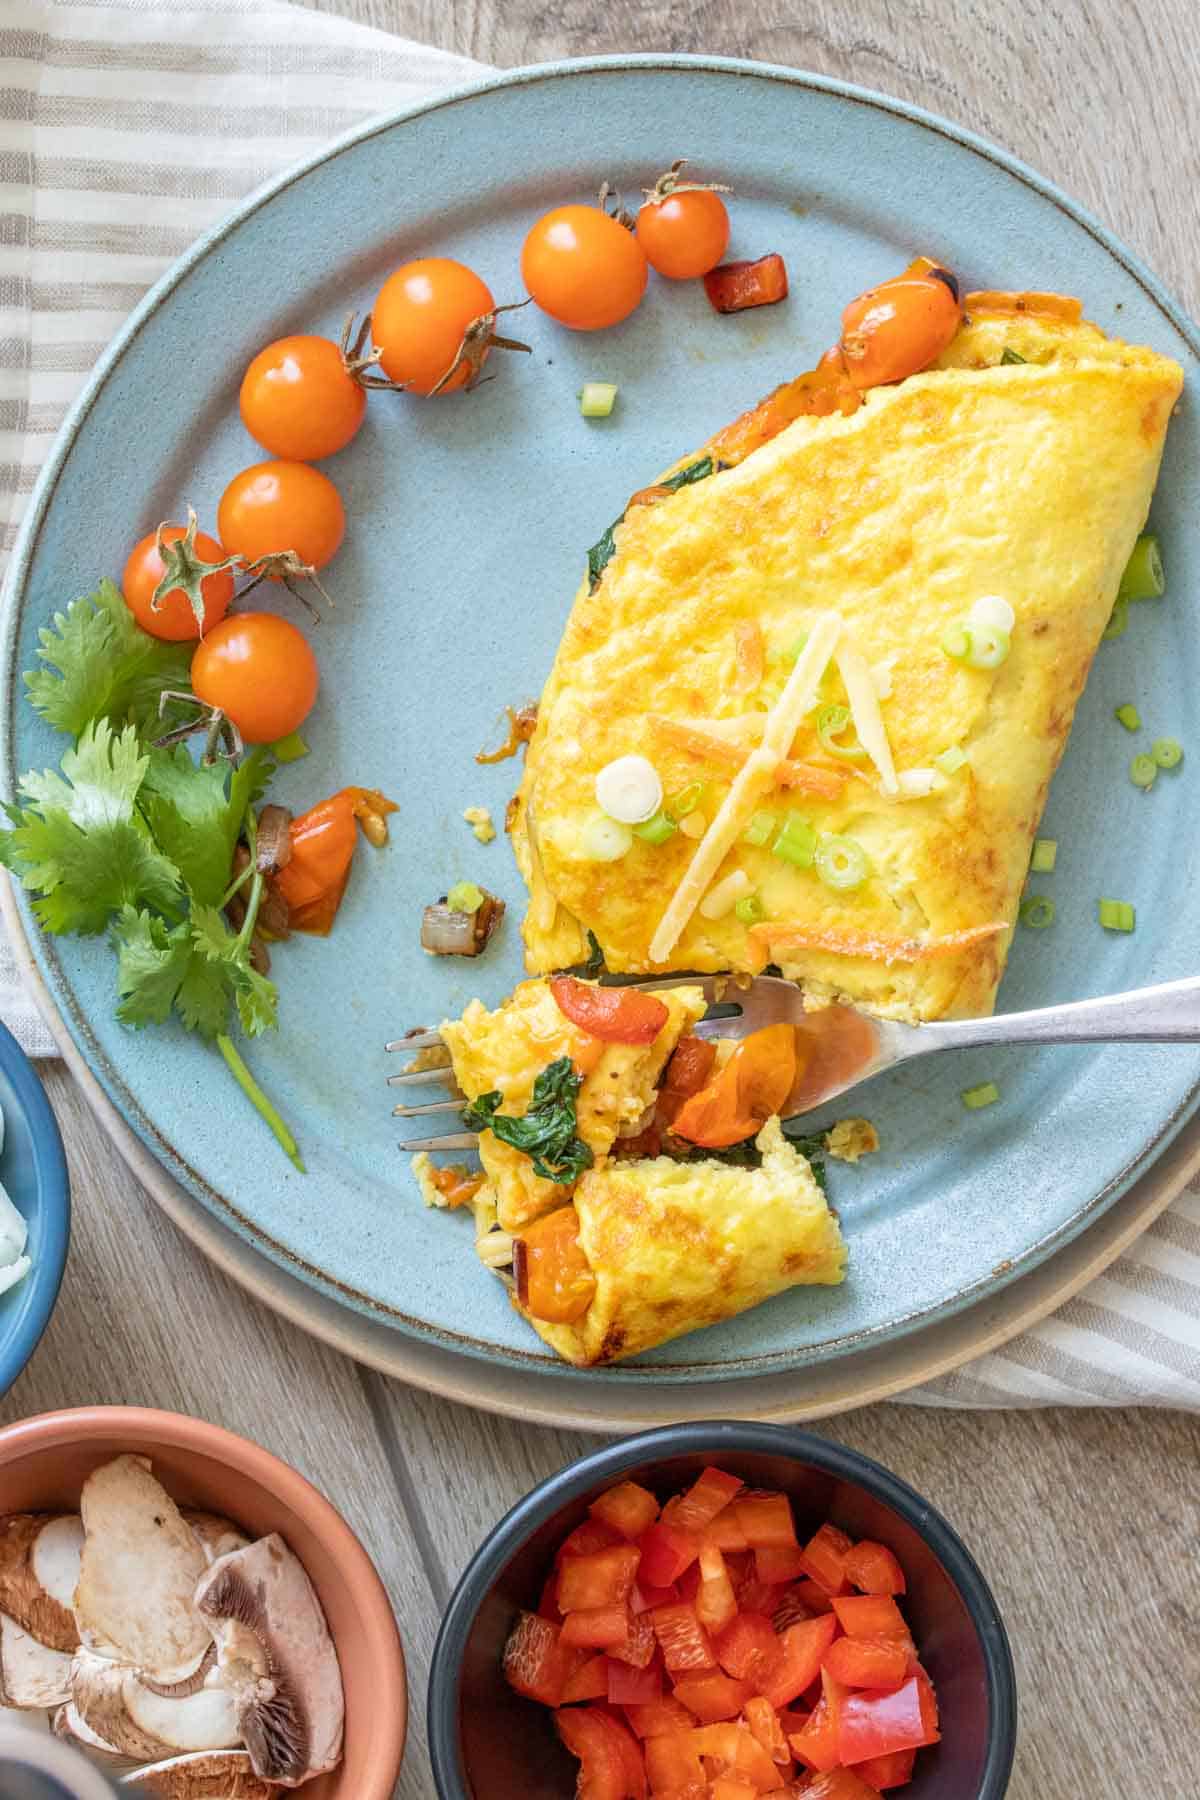 A fork getting a bite from a veggie omelet on a blue plate next to cherry tomatoes on a blue plate.